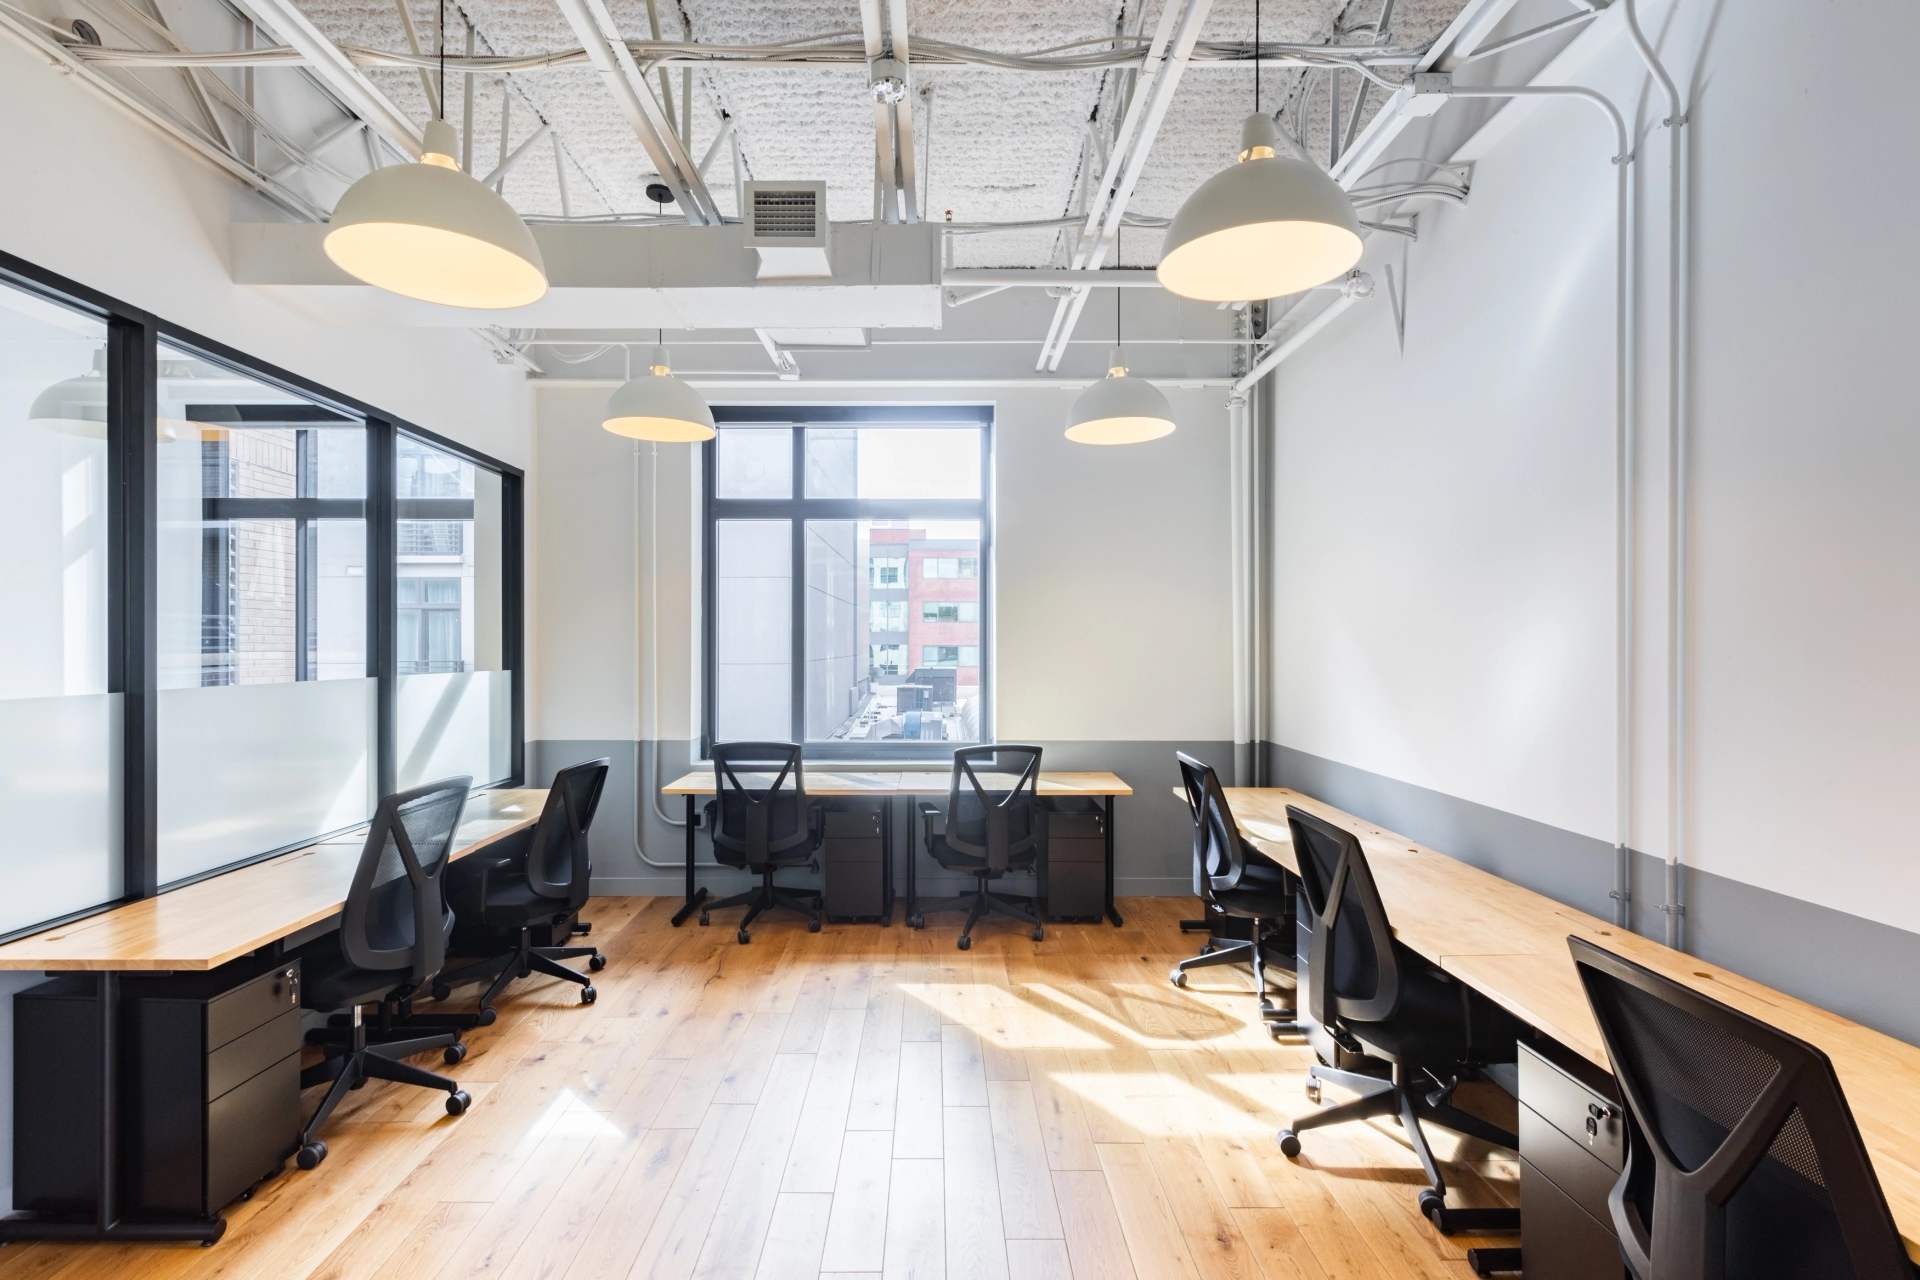 An open office with workspaces featuring wooden floors and black desks.